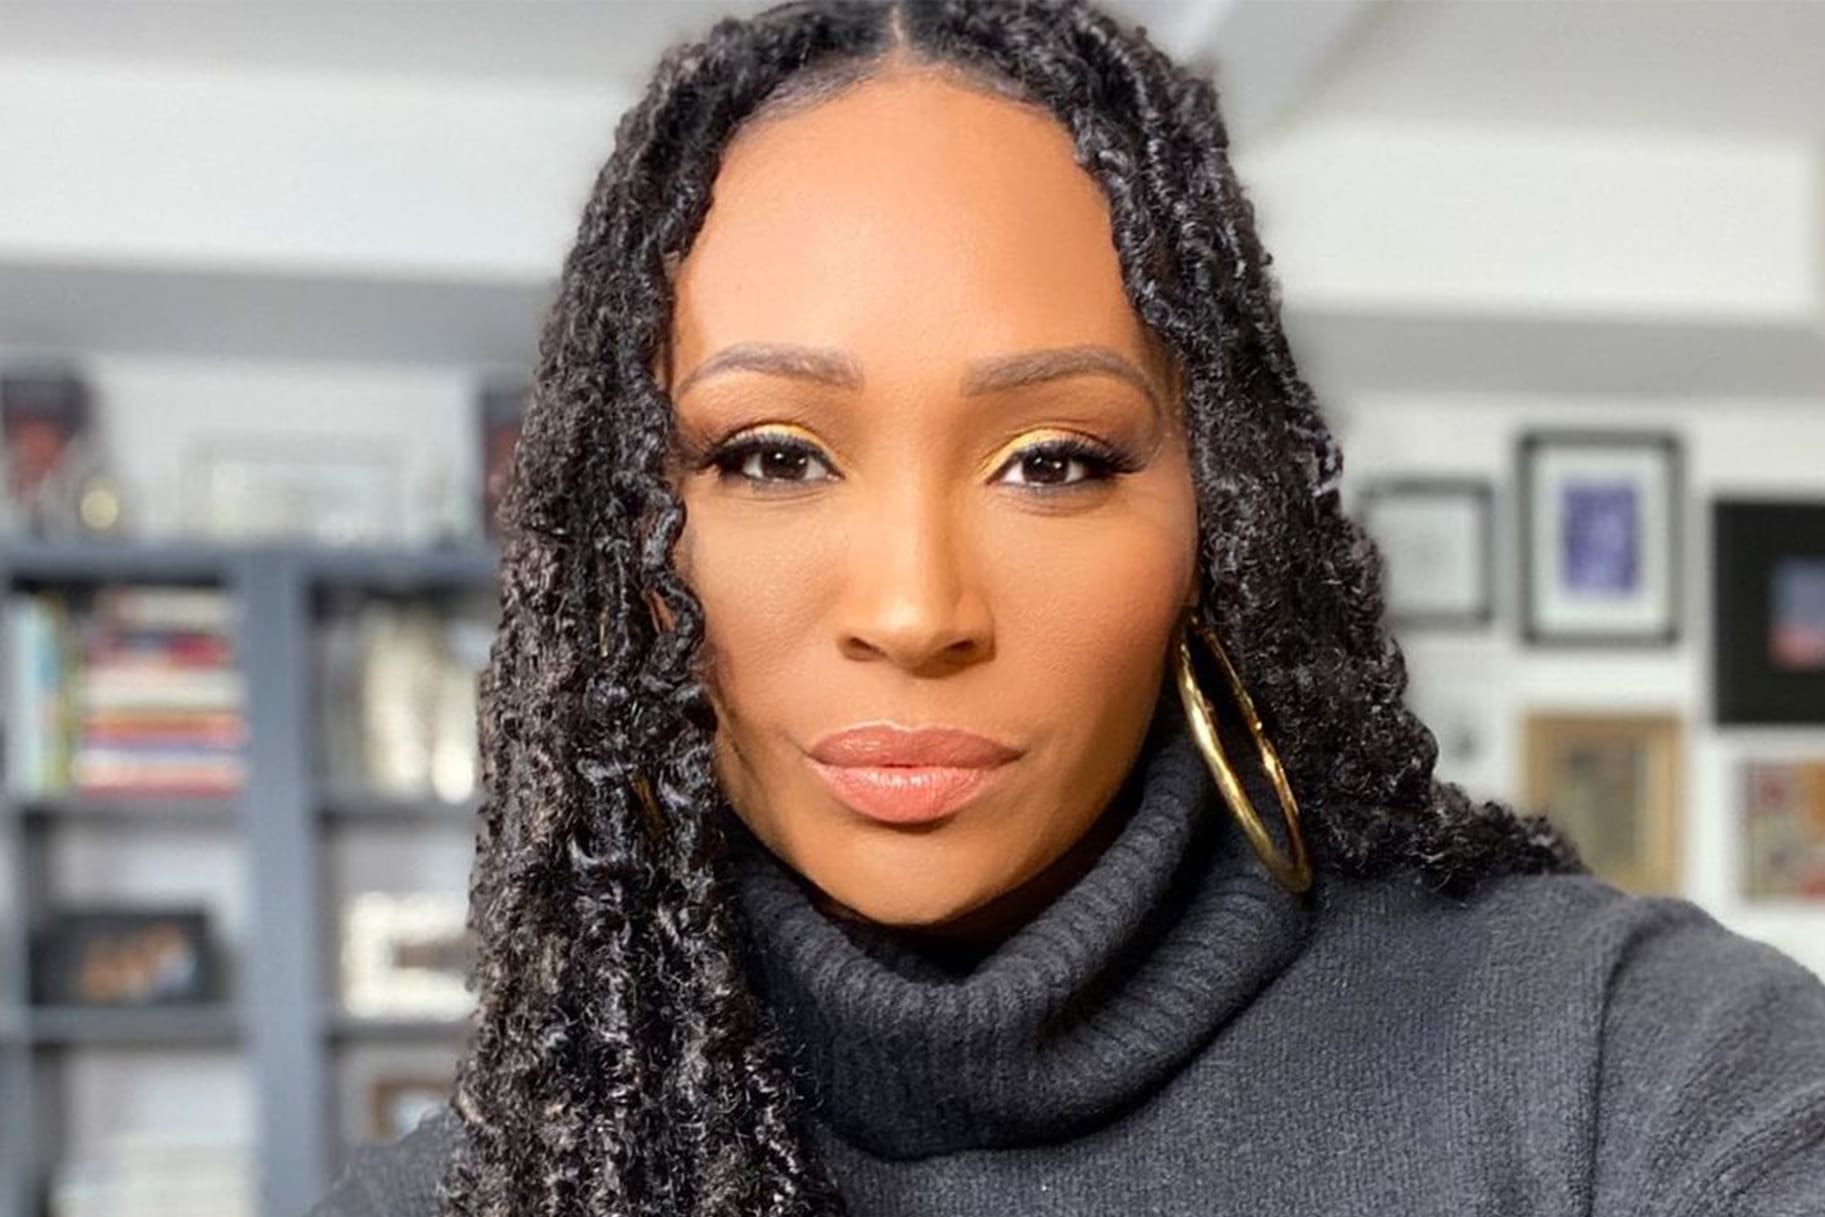 Cynthia Bailey's No-Makeup Photo Has Fans In Awe - See Her Flawless Face